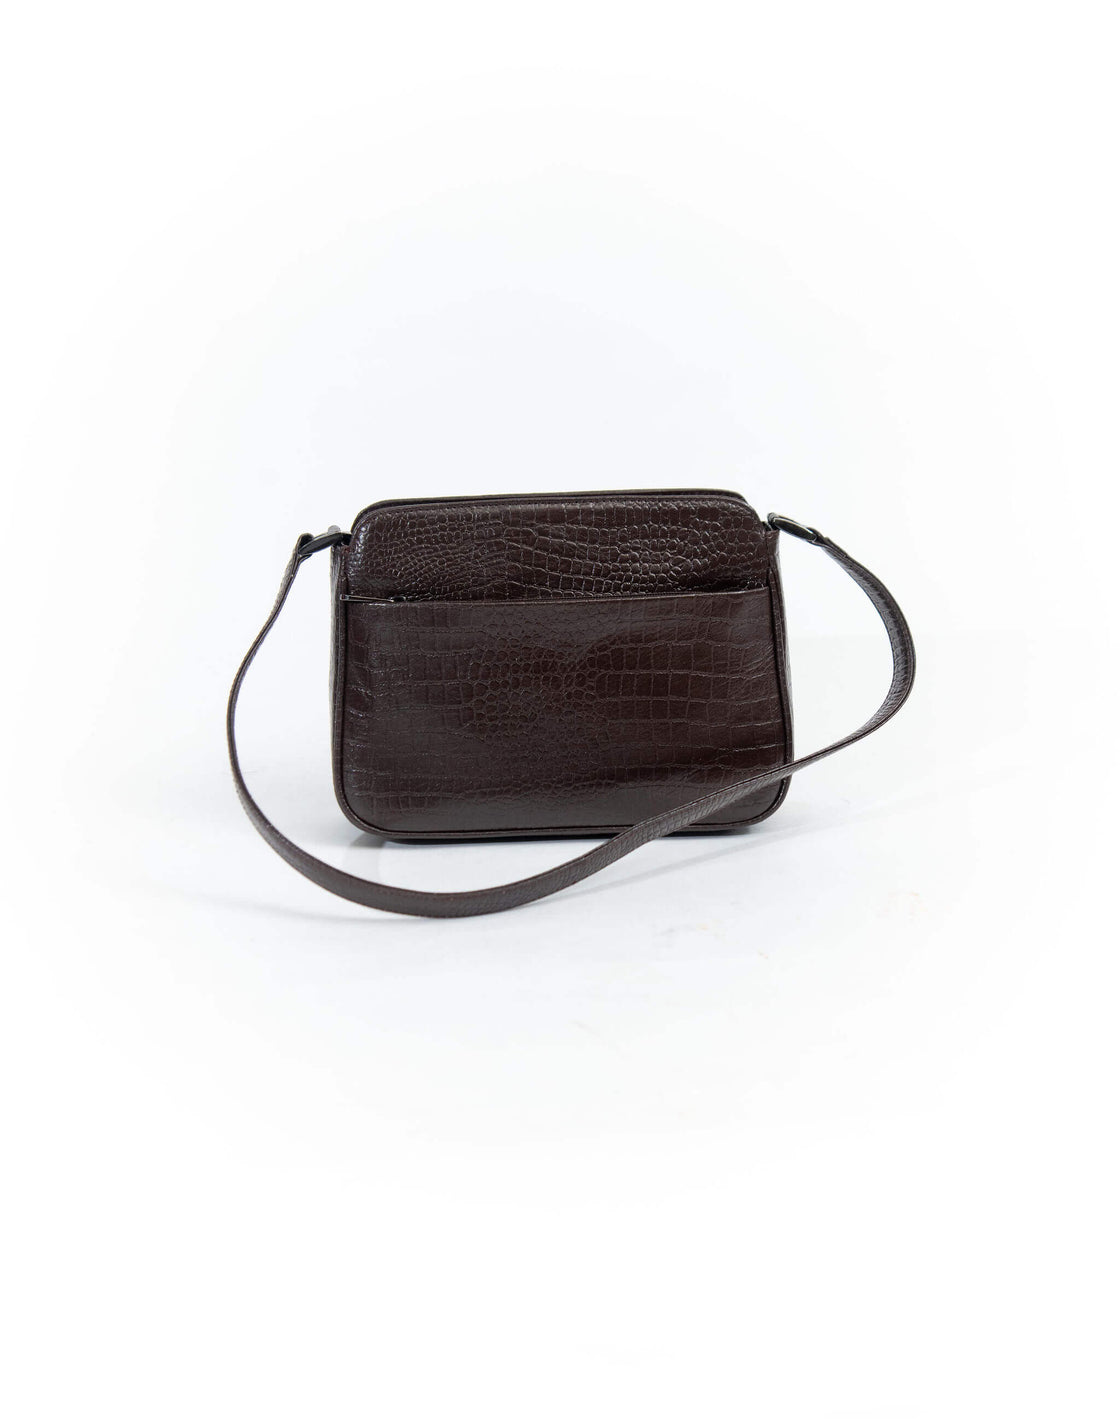 Structured bag - Croco